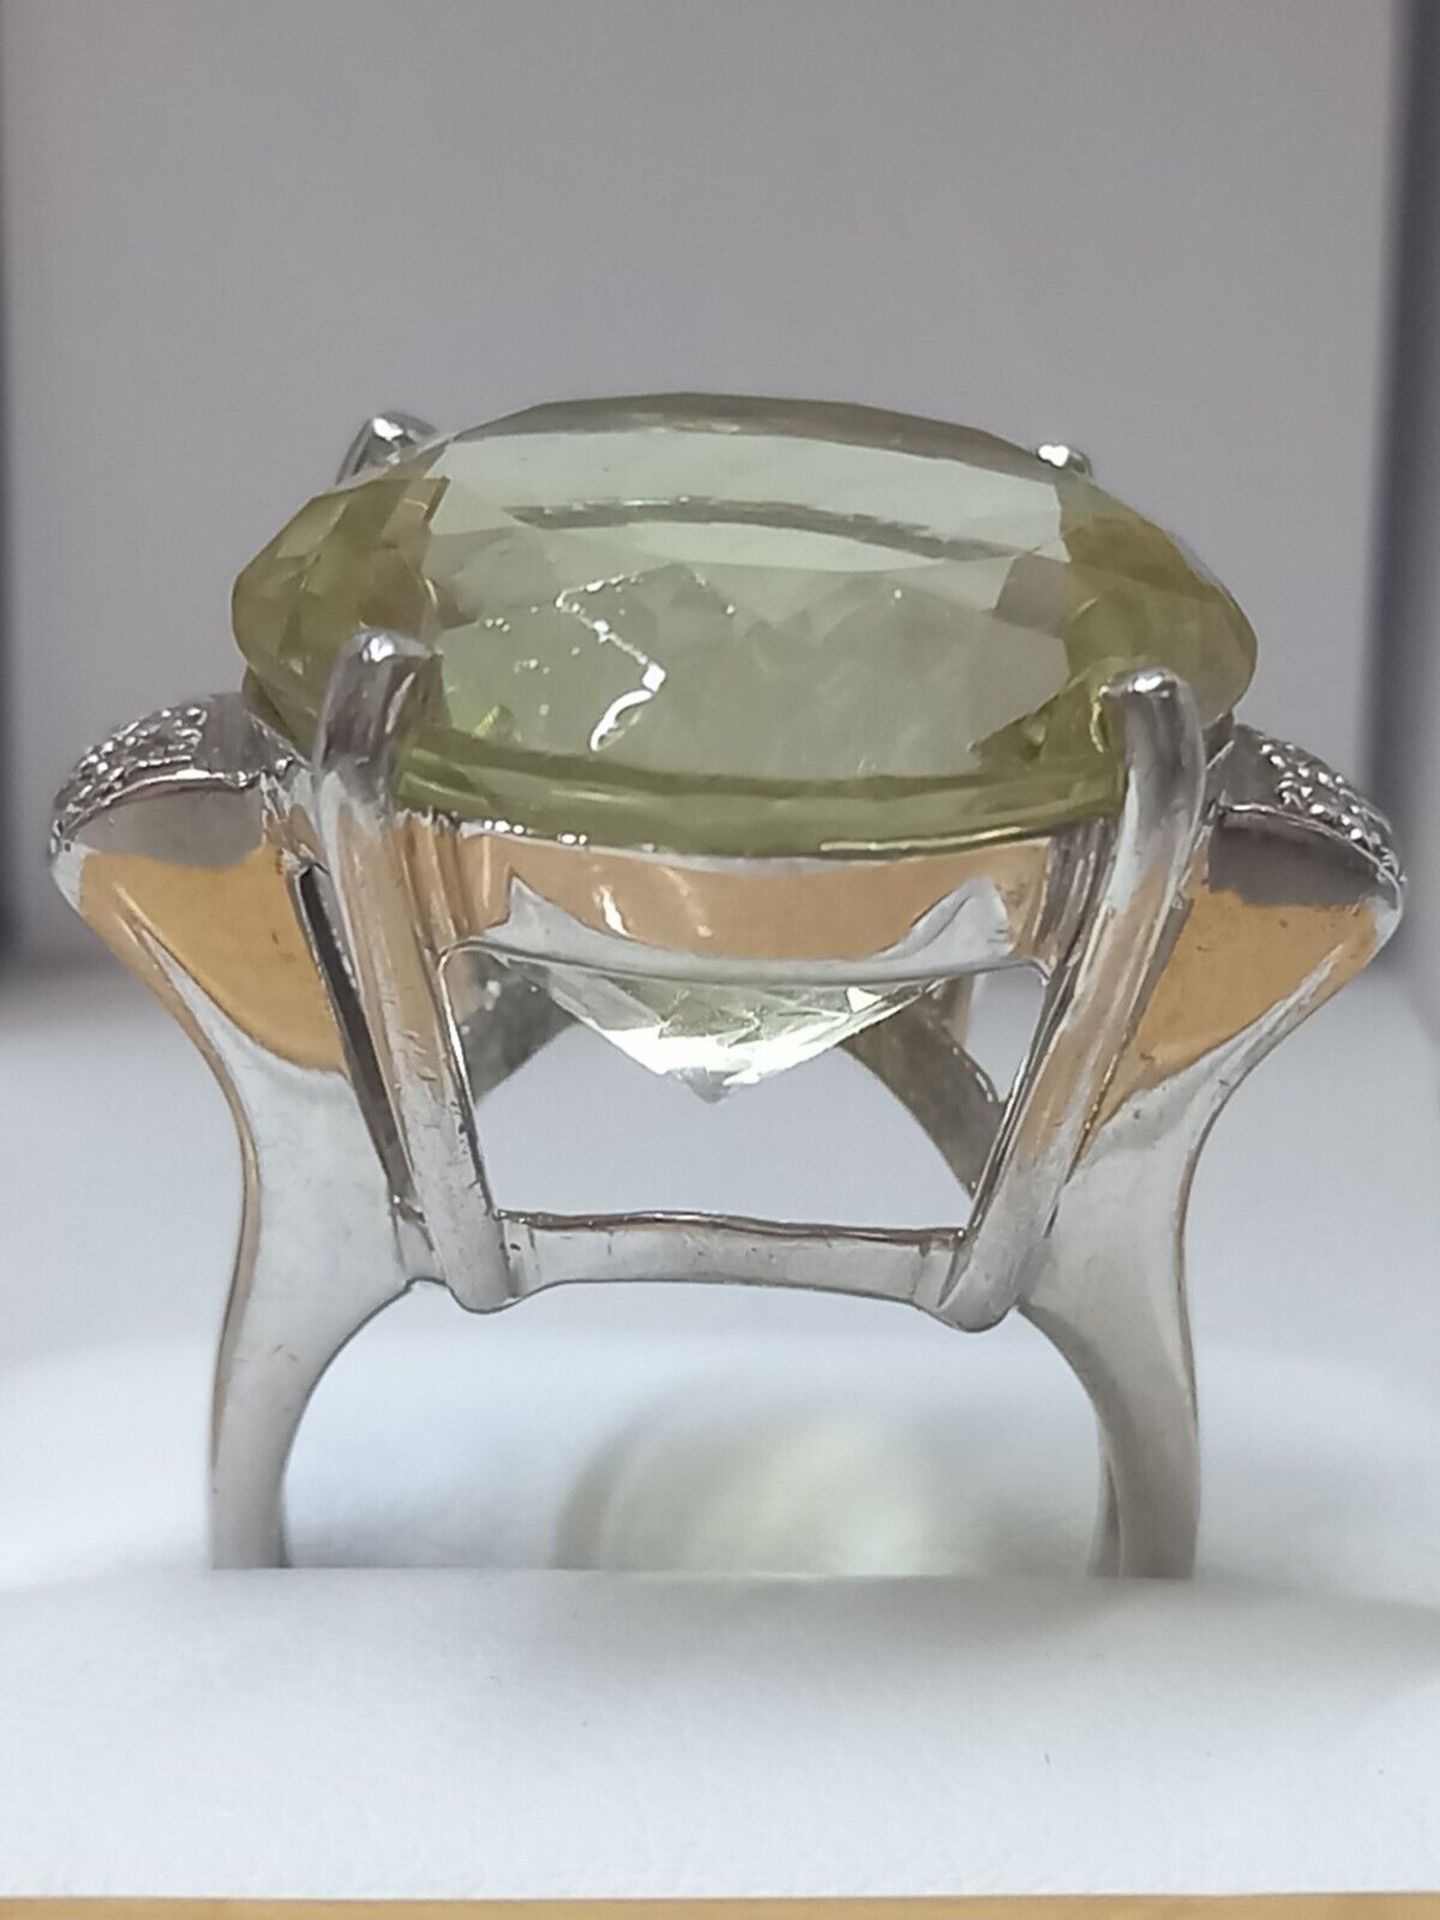 LIME GREEN CRYSTAL DRESS RING WITH DIAMONDS - Image 5 of 6